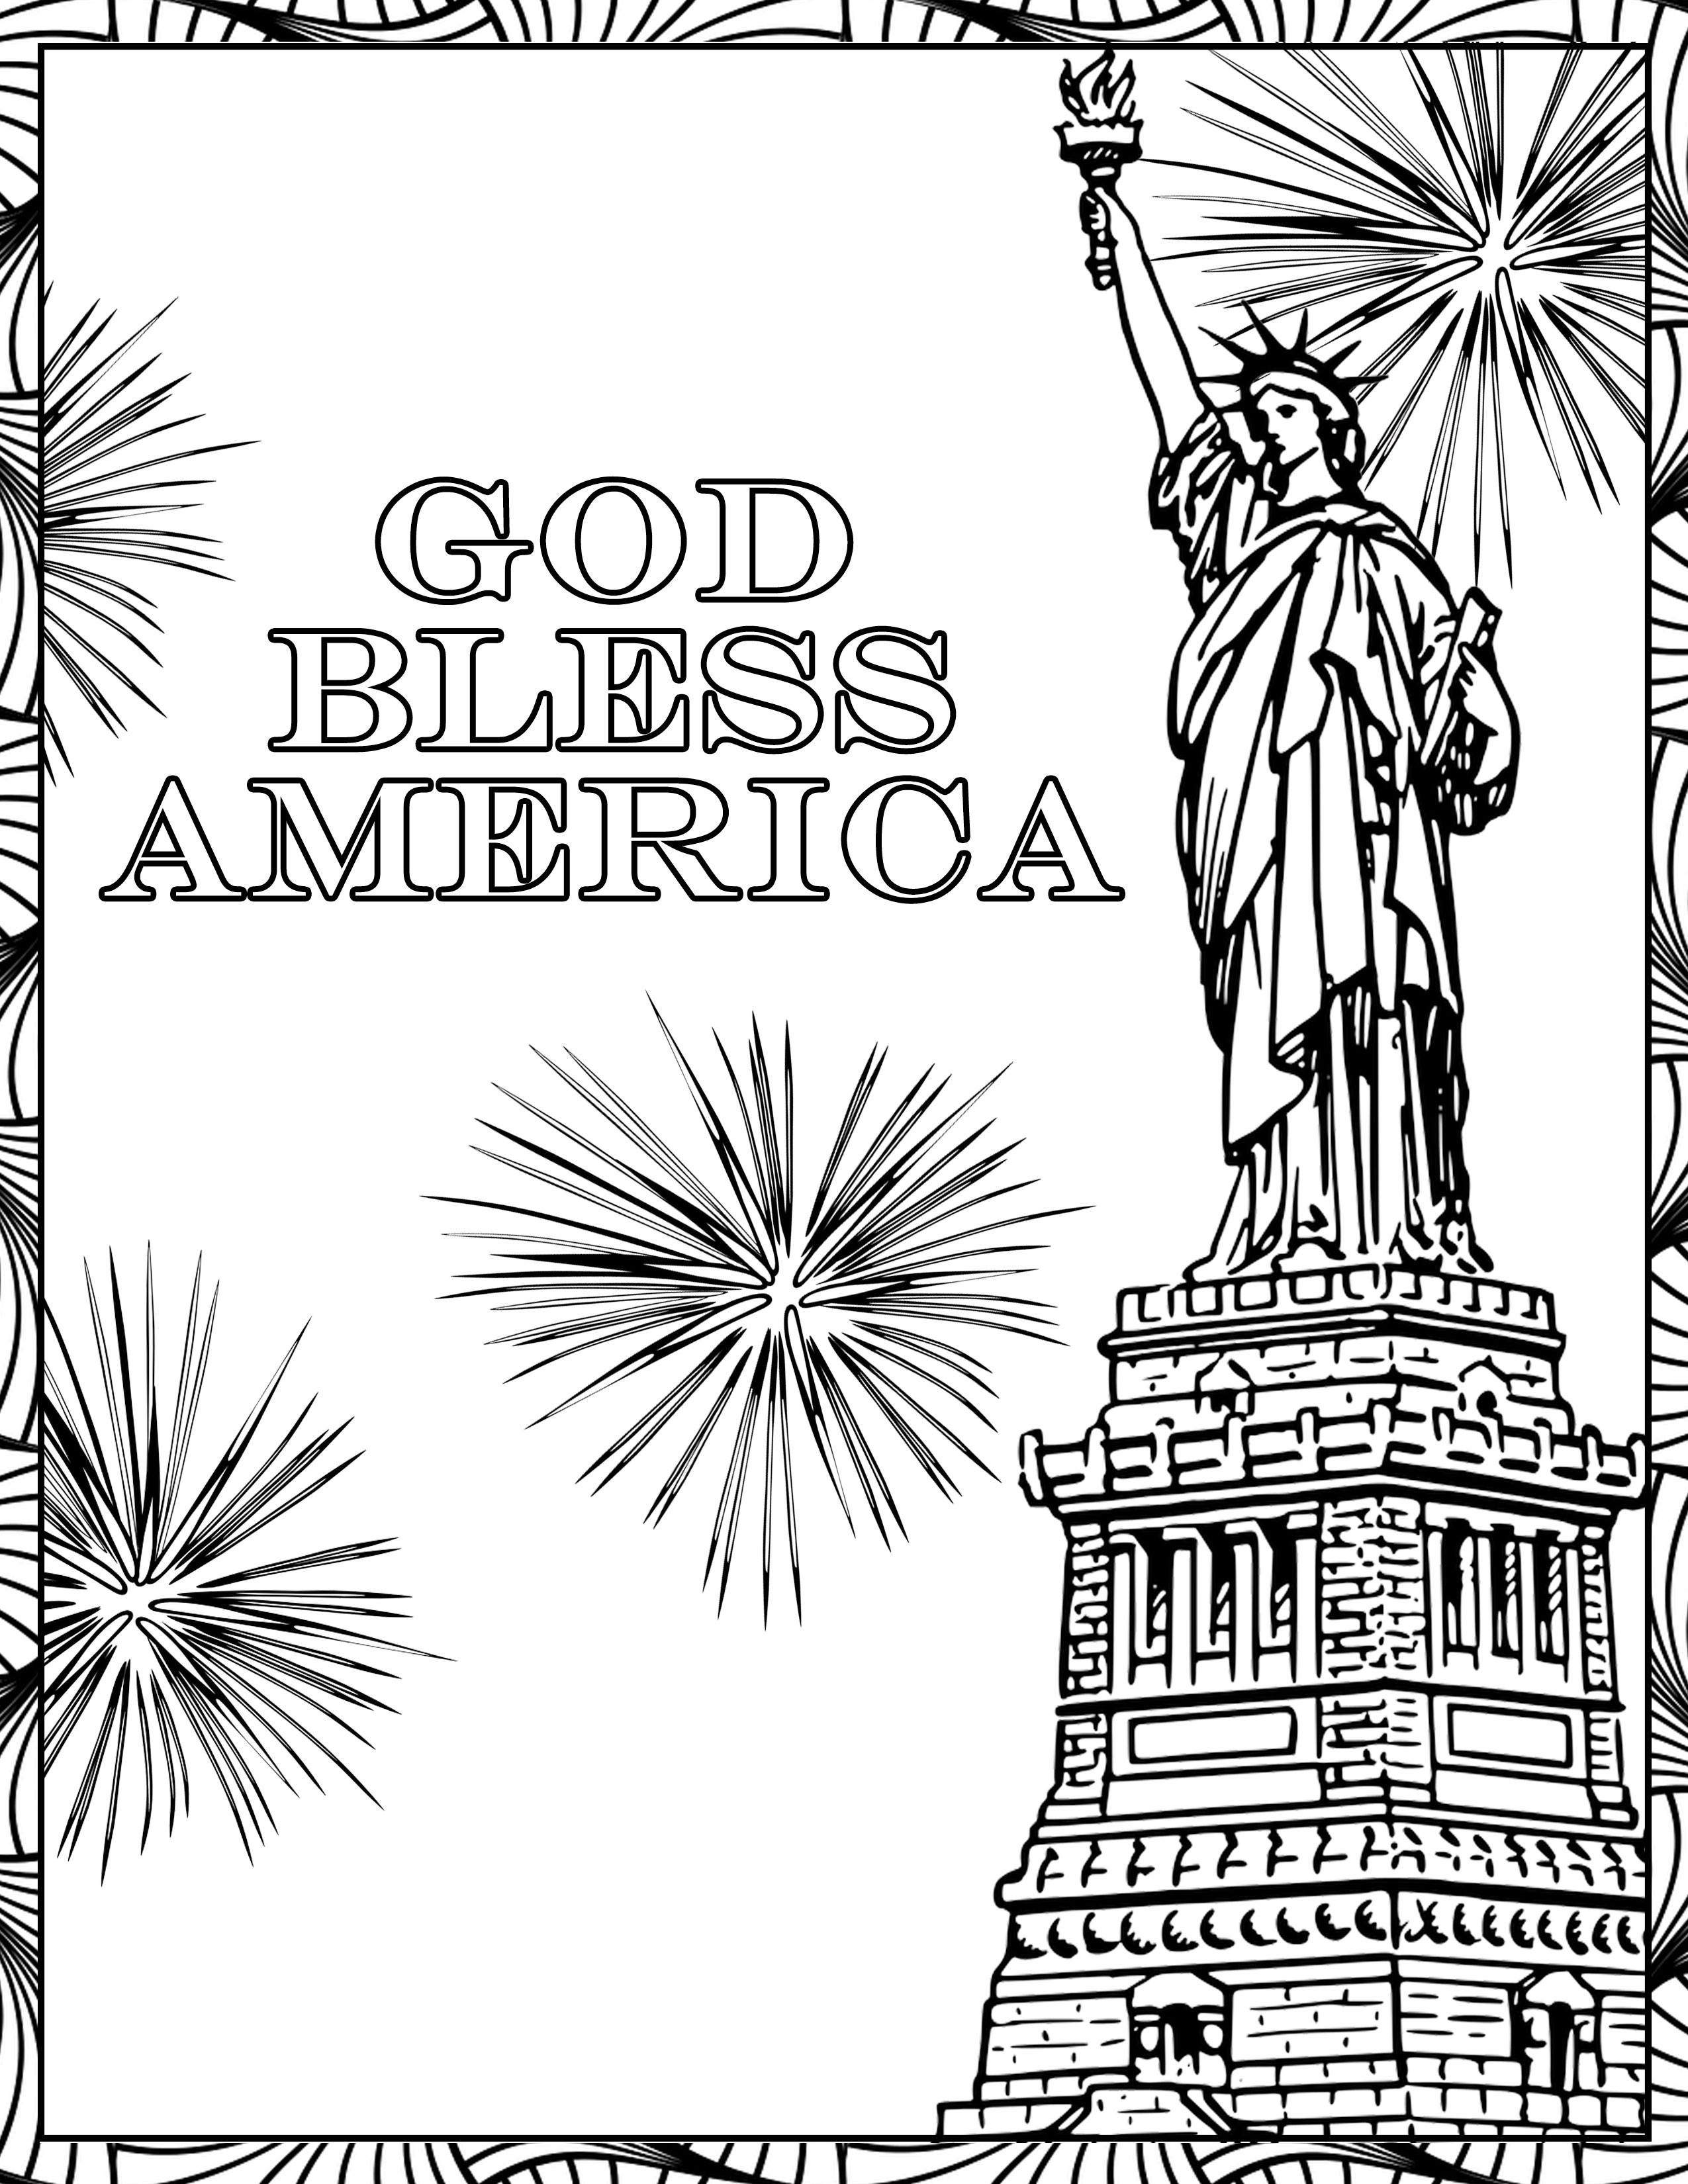 July 4th Coloring Pages - Christianbook.com Blog